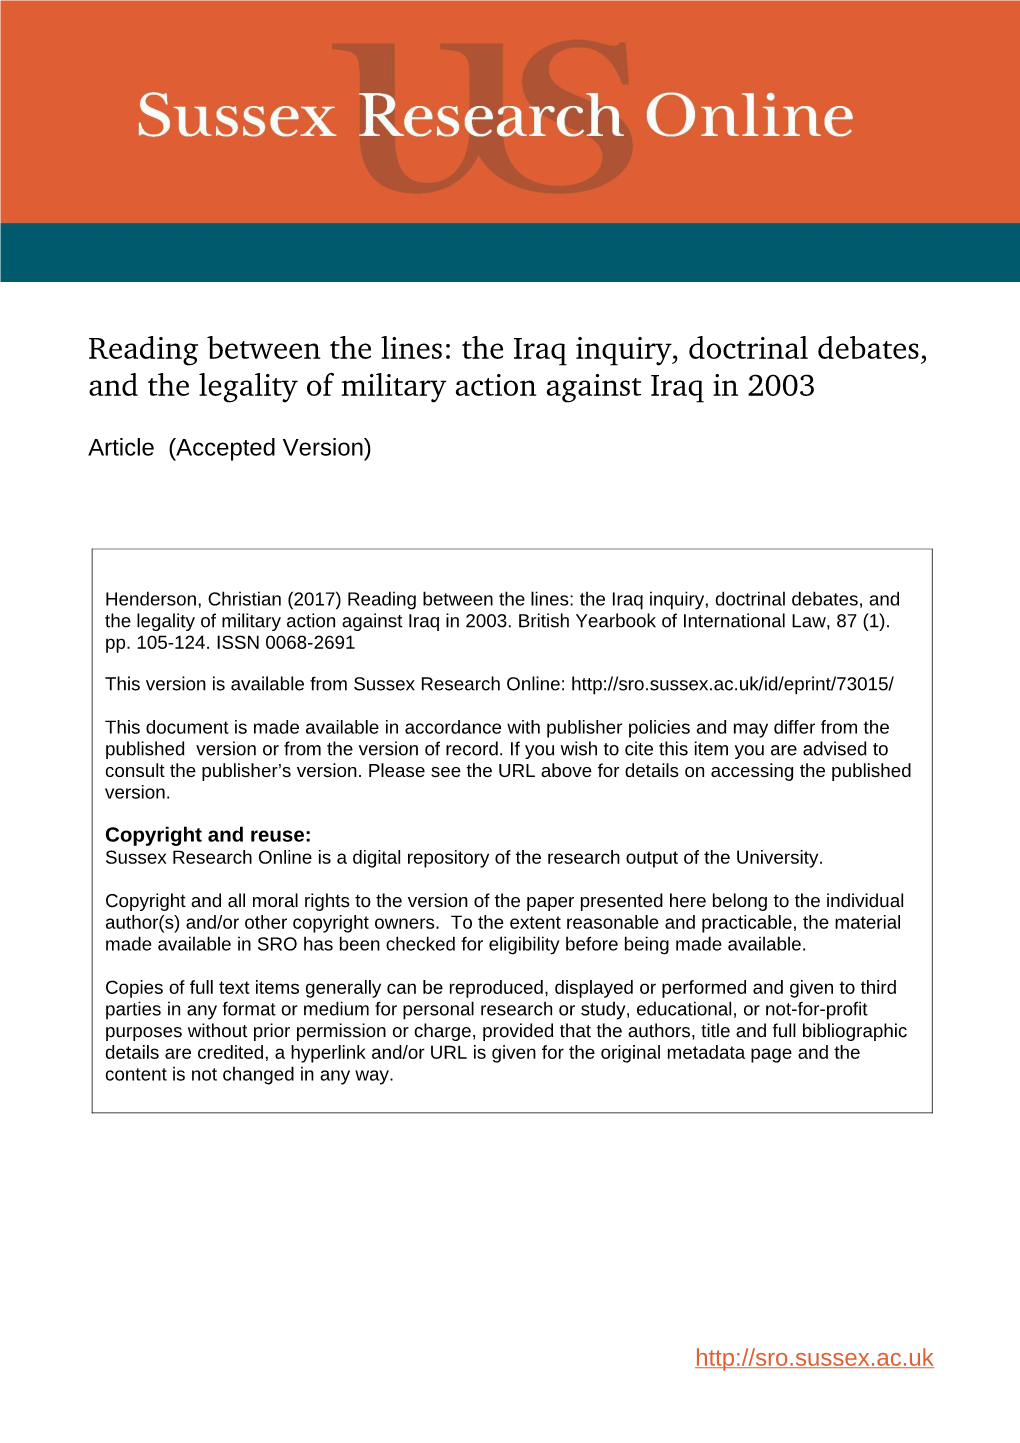 The Iraq Inquiry, Doctrinal Debates, and the Legality of Military Action Against Iraq in 2003